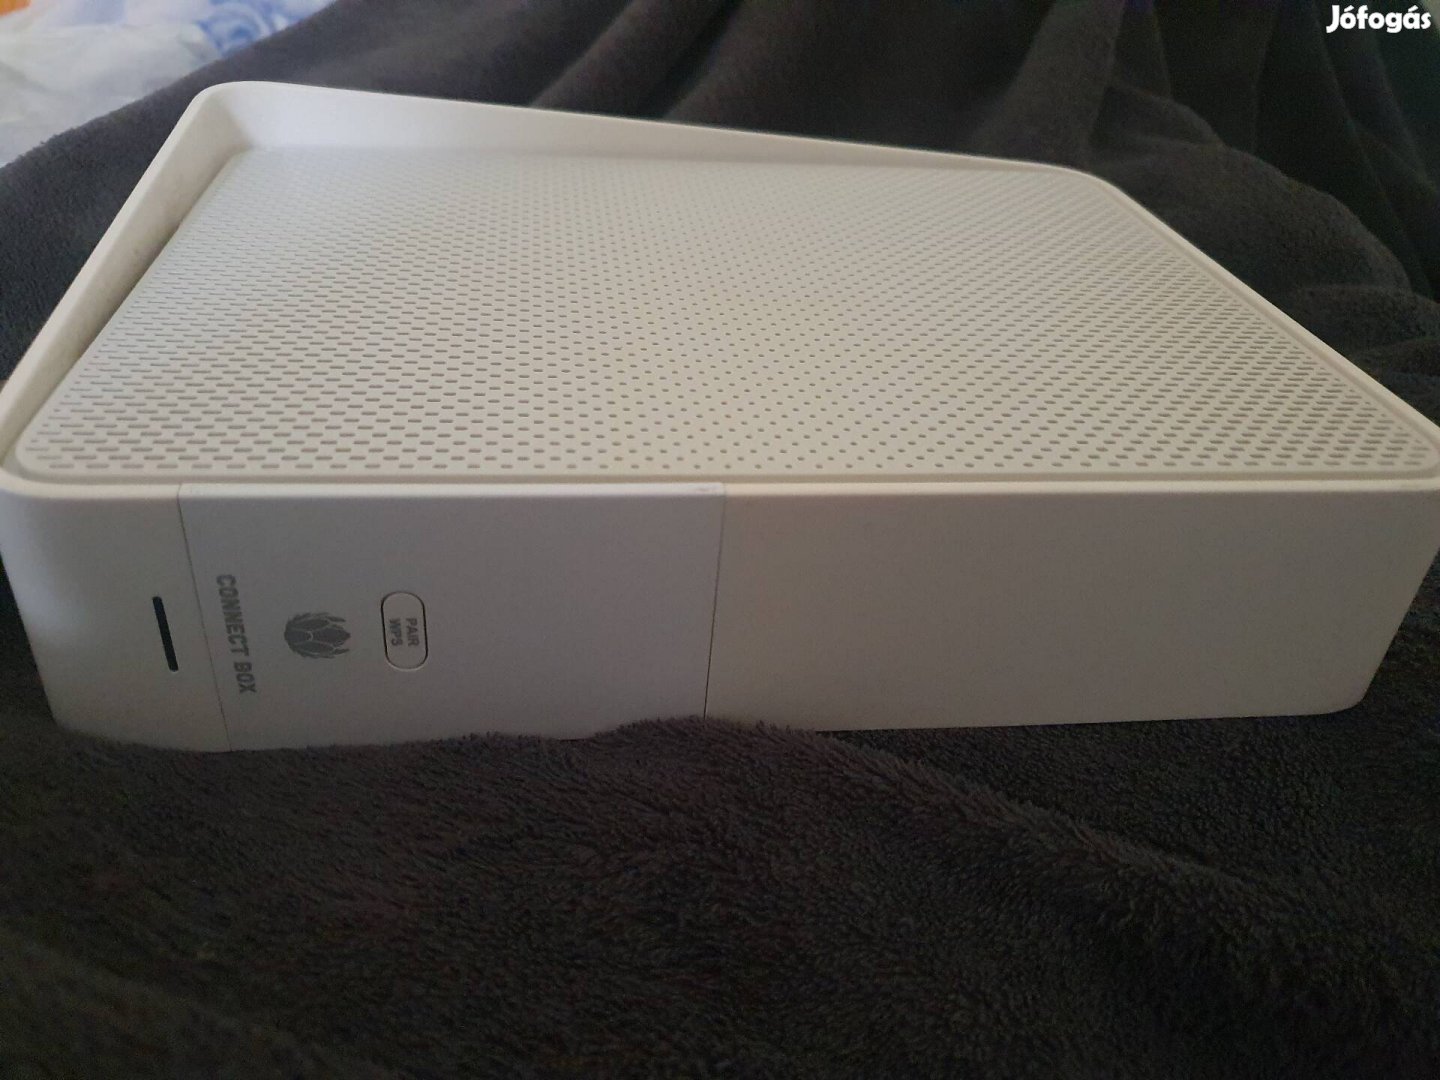 Upc wifi router 5ghz